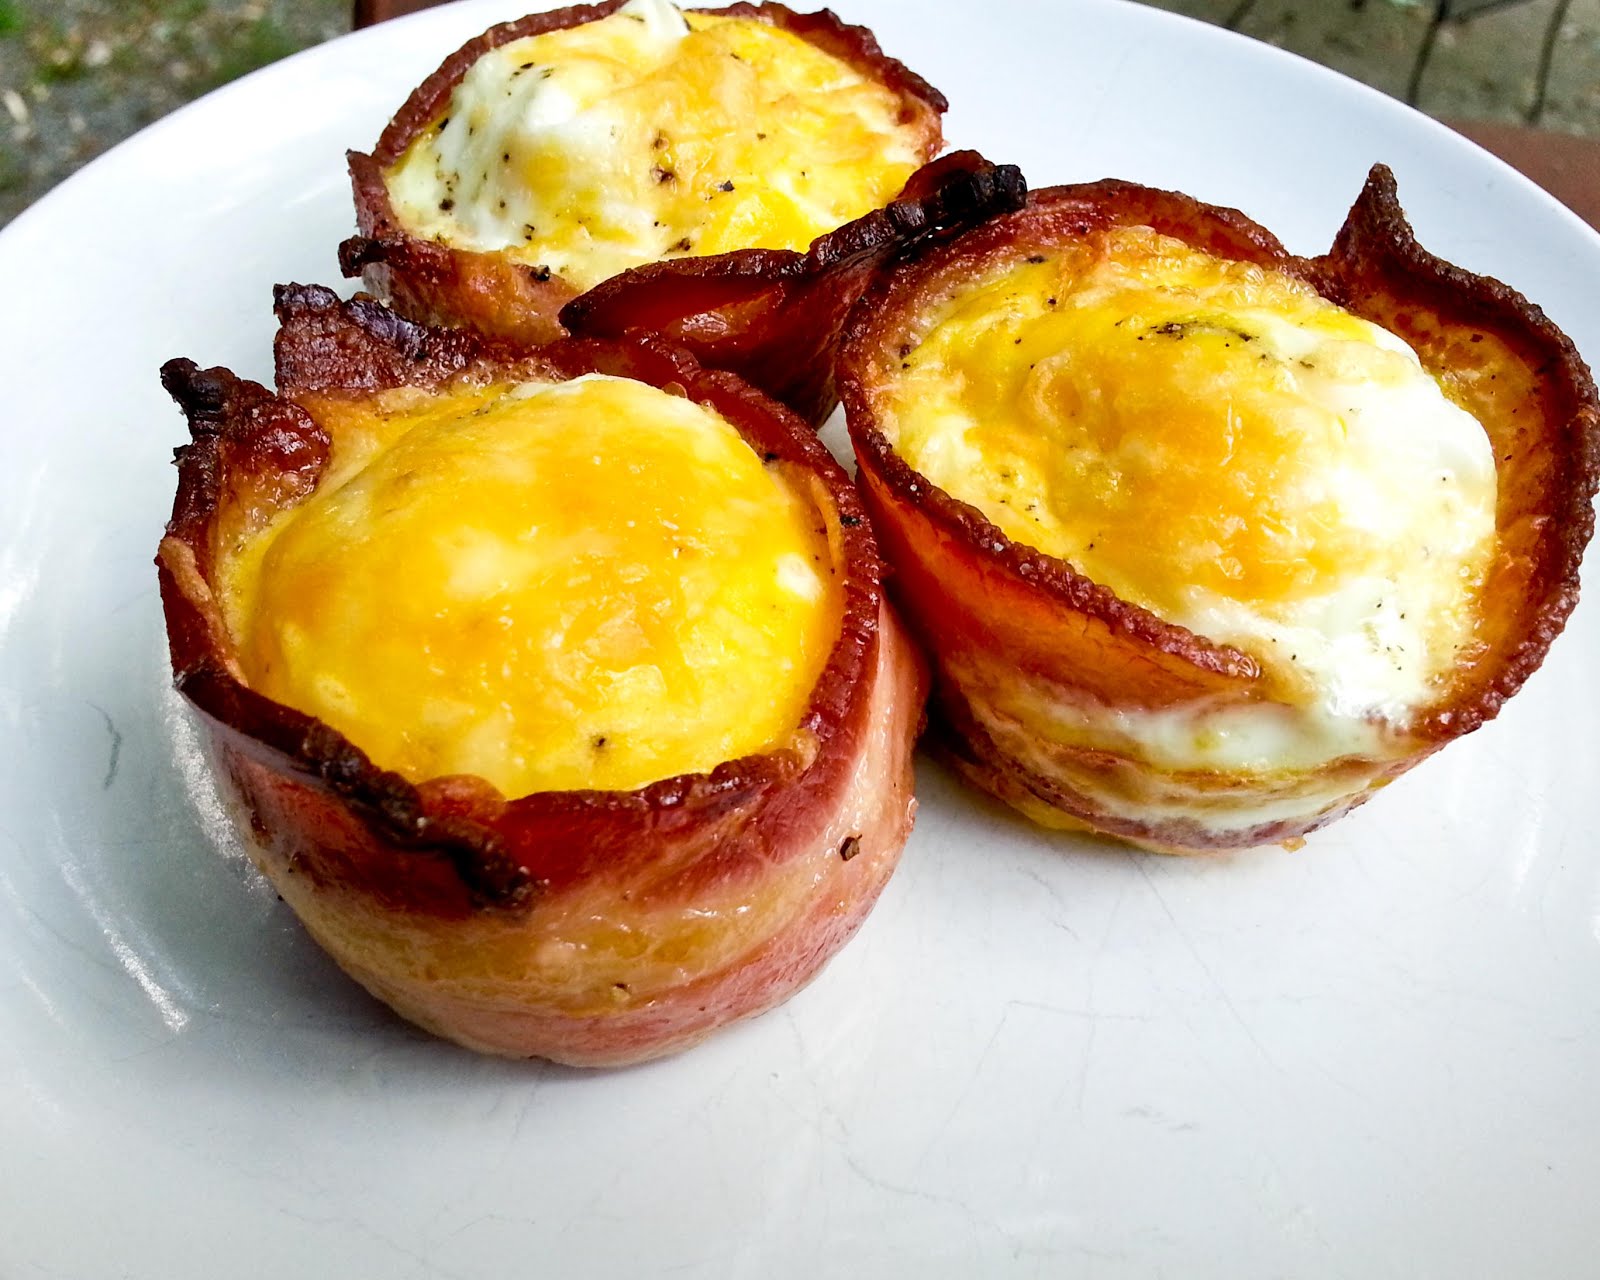 Bacon cups for Brekkie!